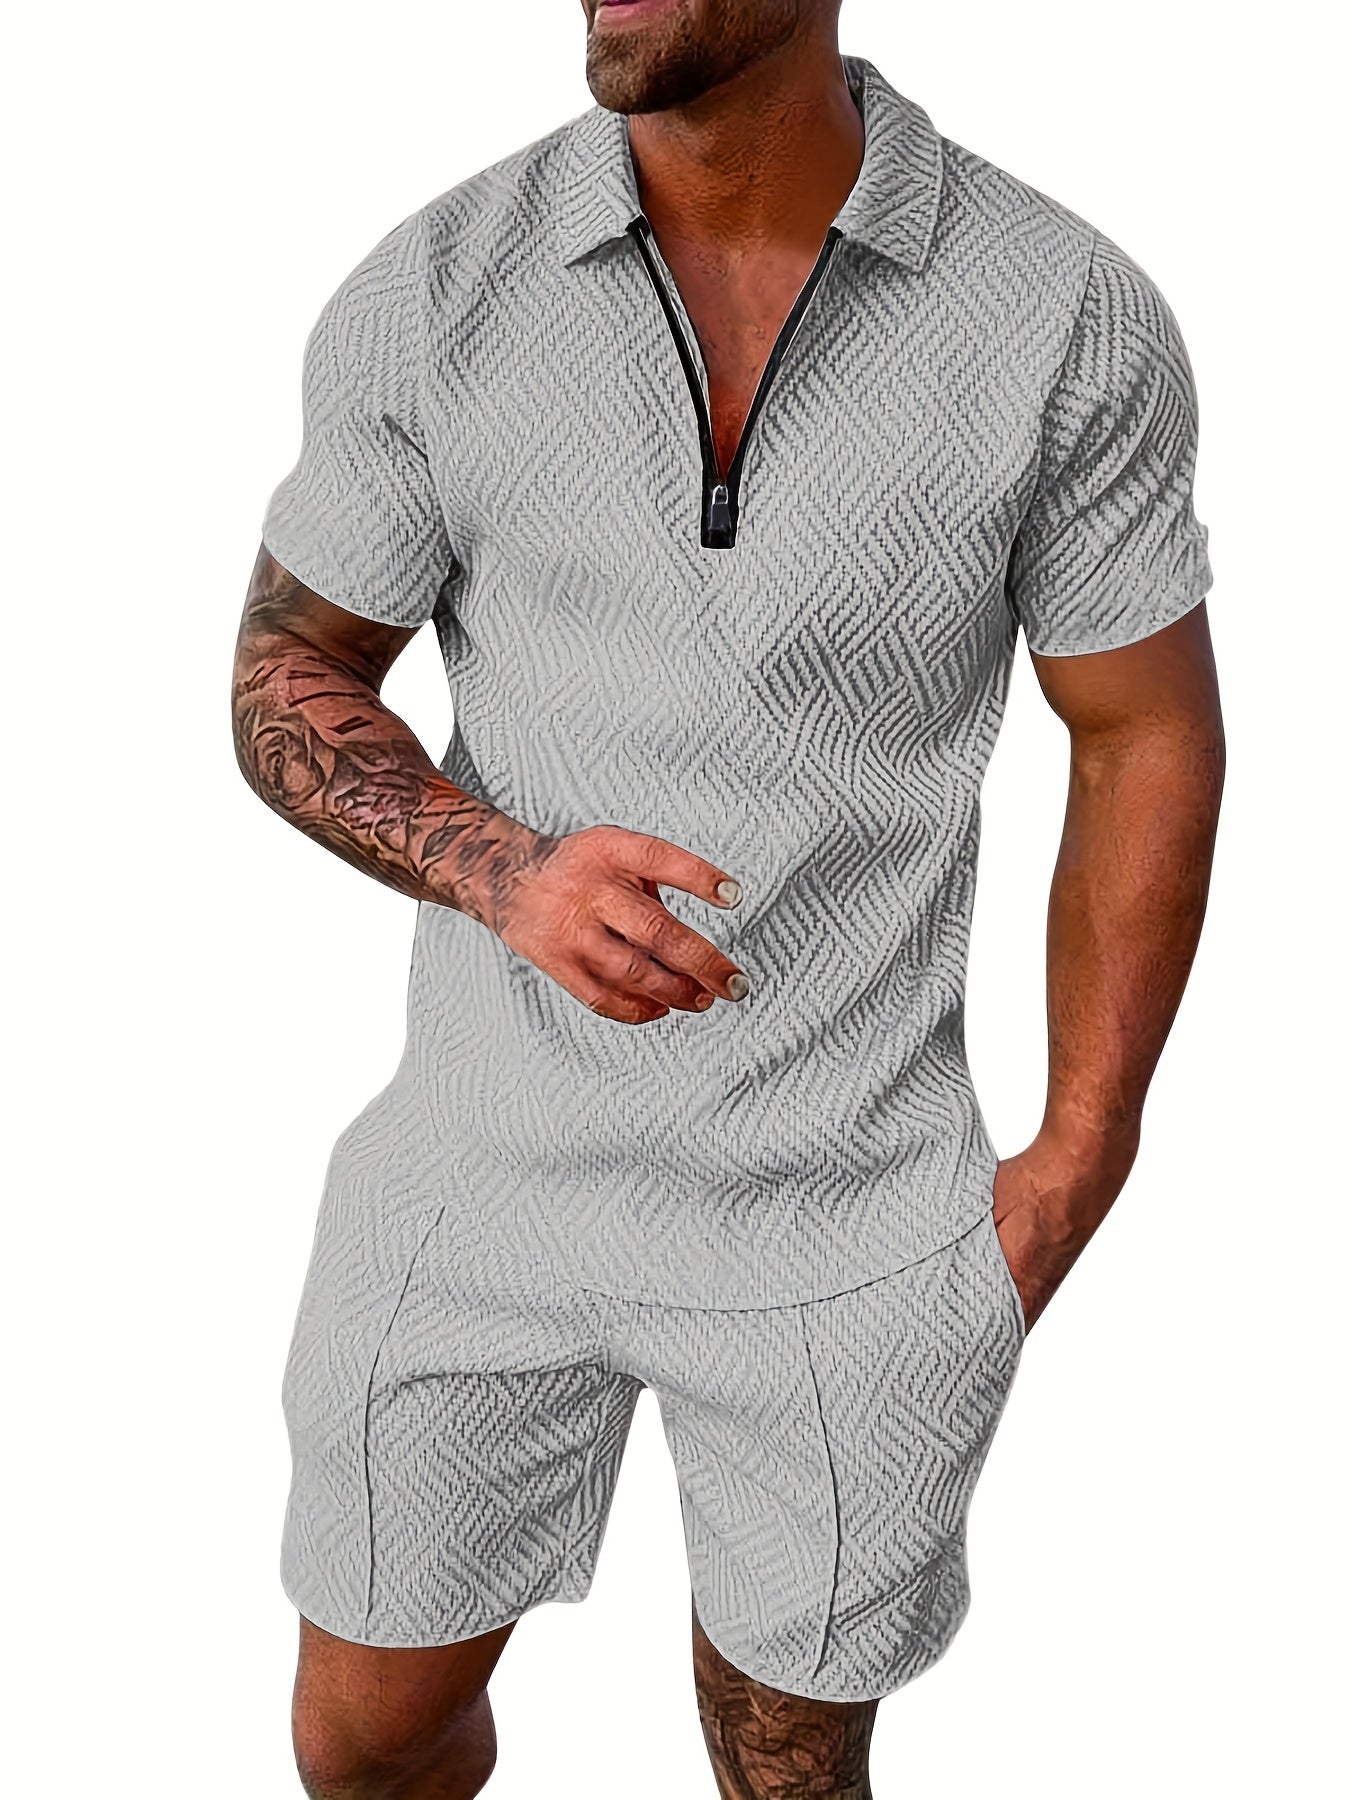 Men's Polyester Thin V-neck Zipper Sweatsuits With V-neck Zipper T-shirt & Shorts Christmas Gifts Best Sellers